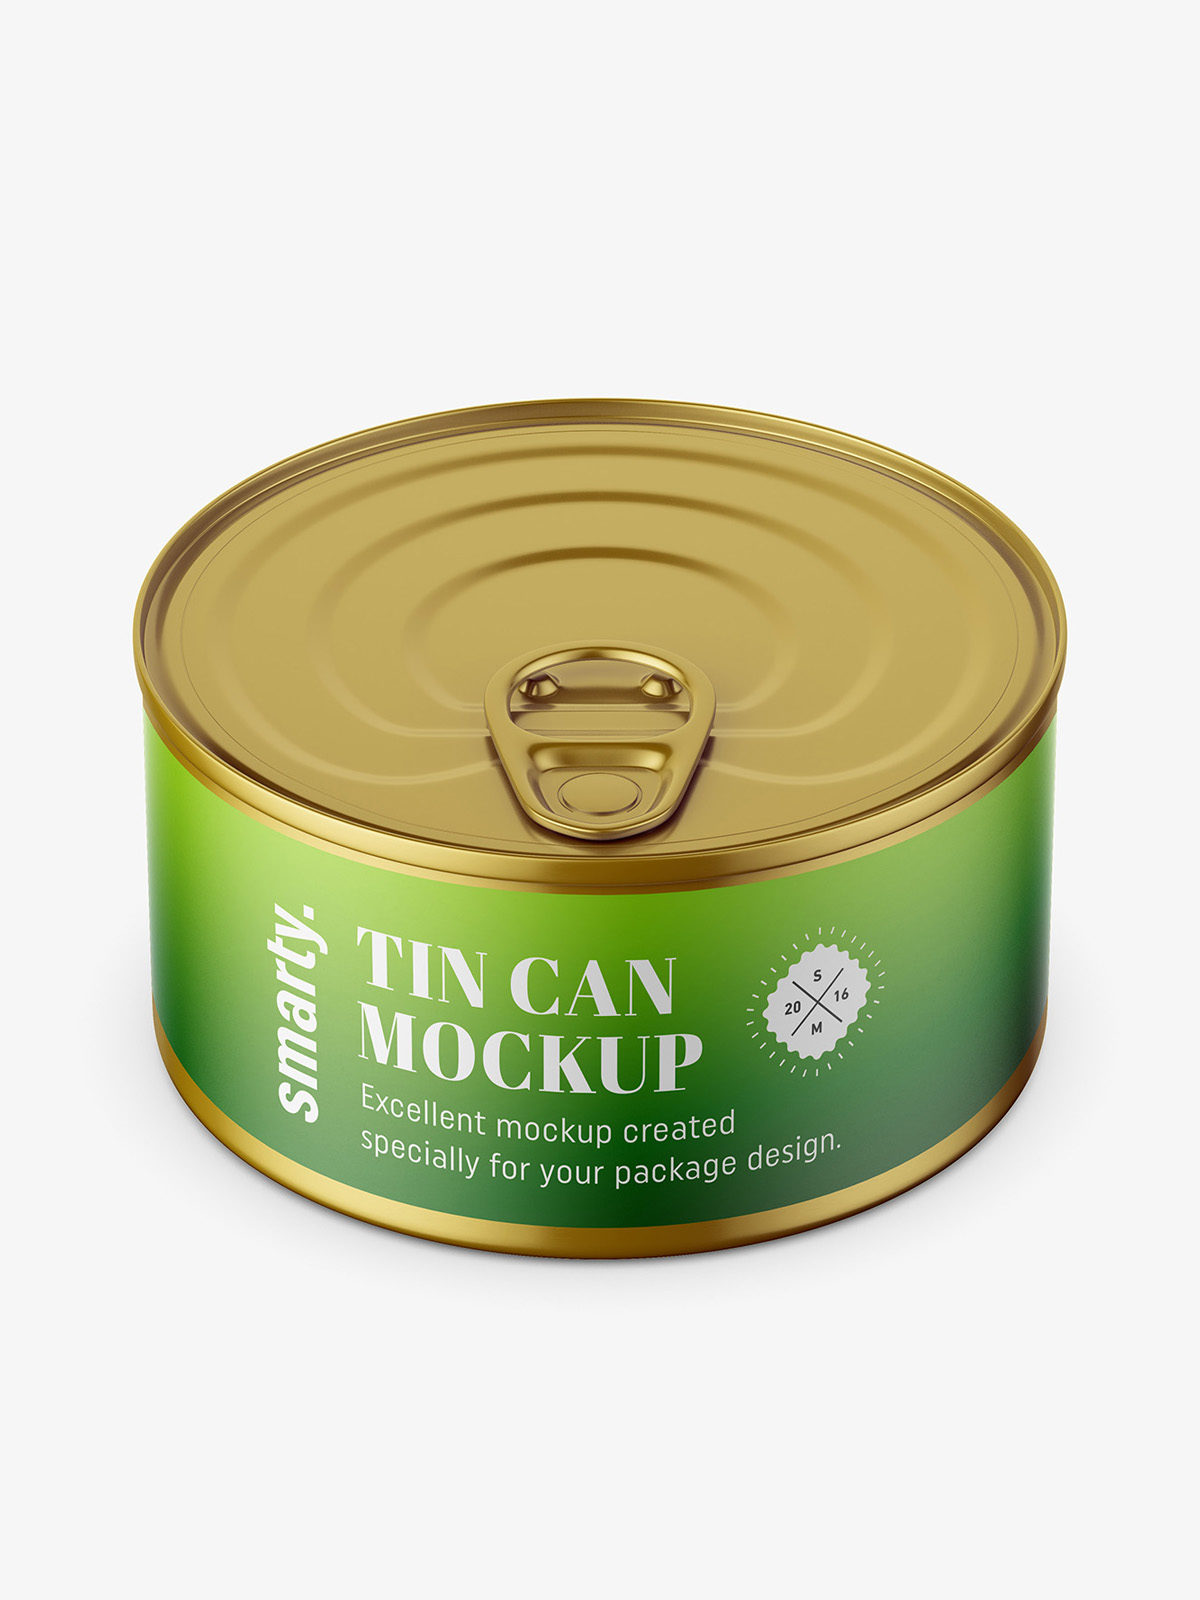 Download Tin can mockup / top view - Smarty Mockups